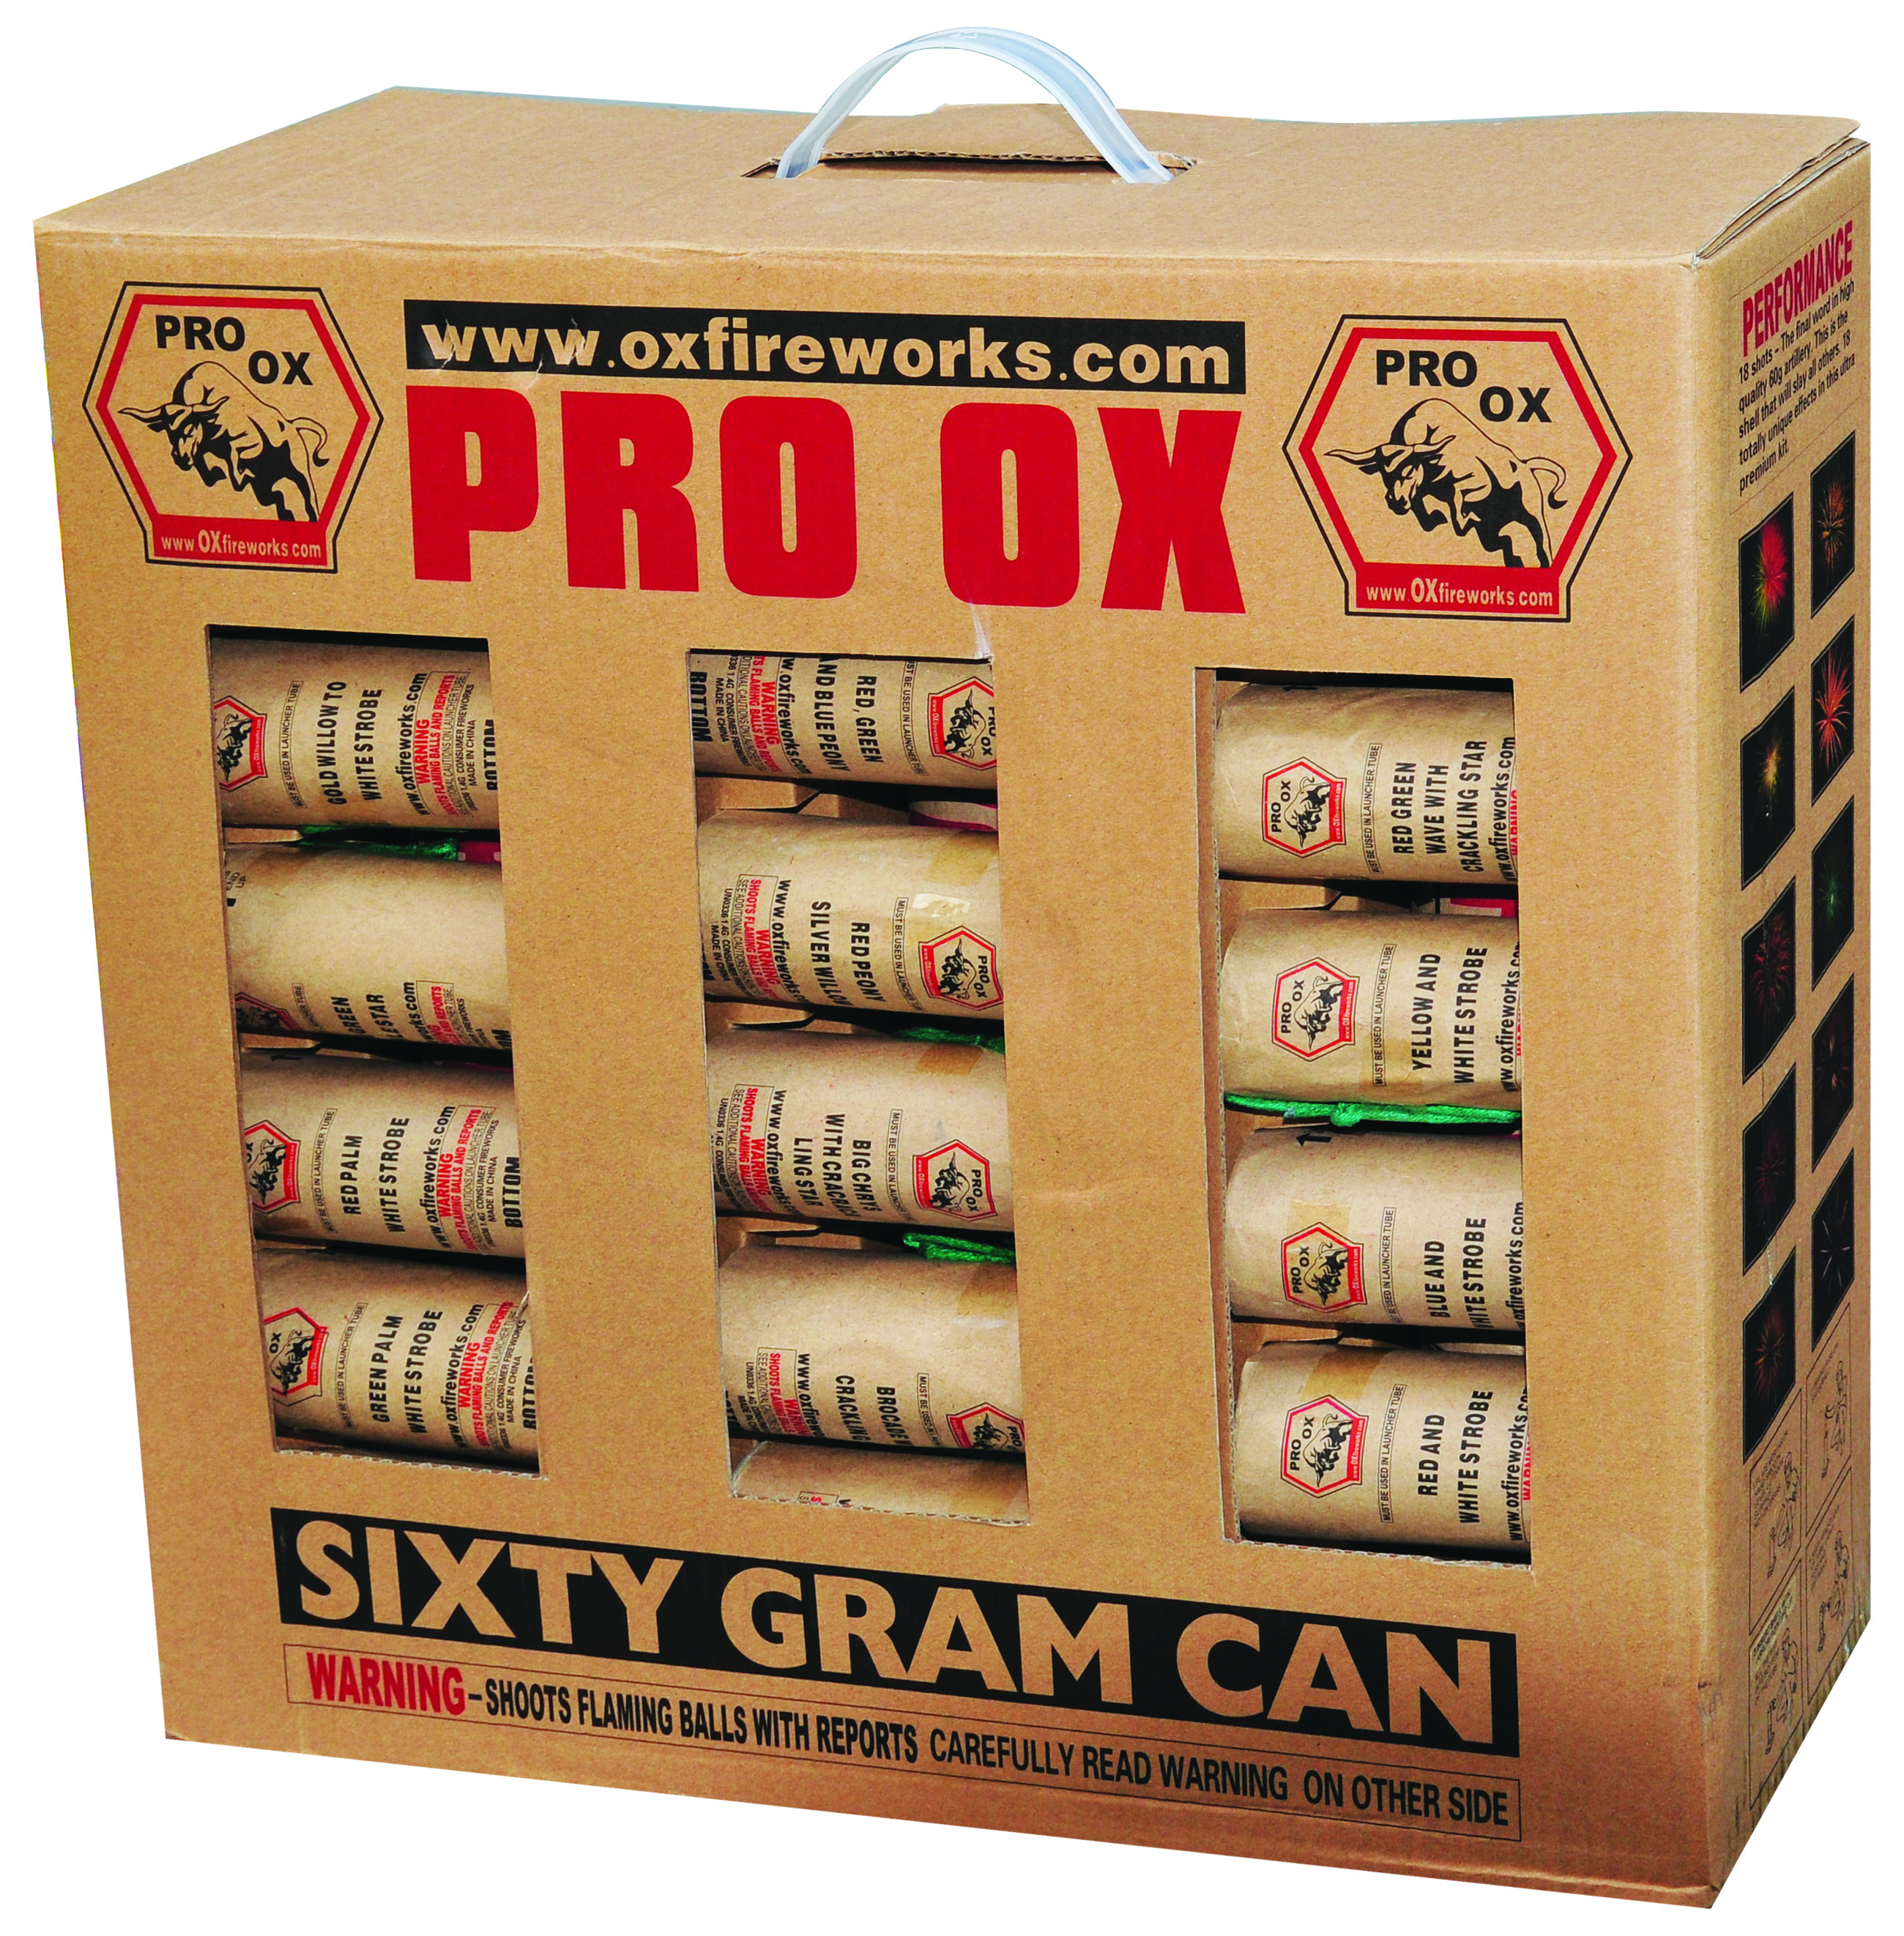 Pro OX 18's 60G Cylinders